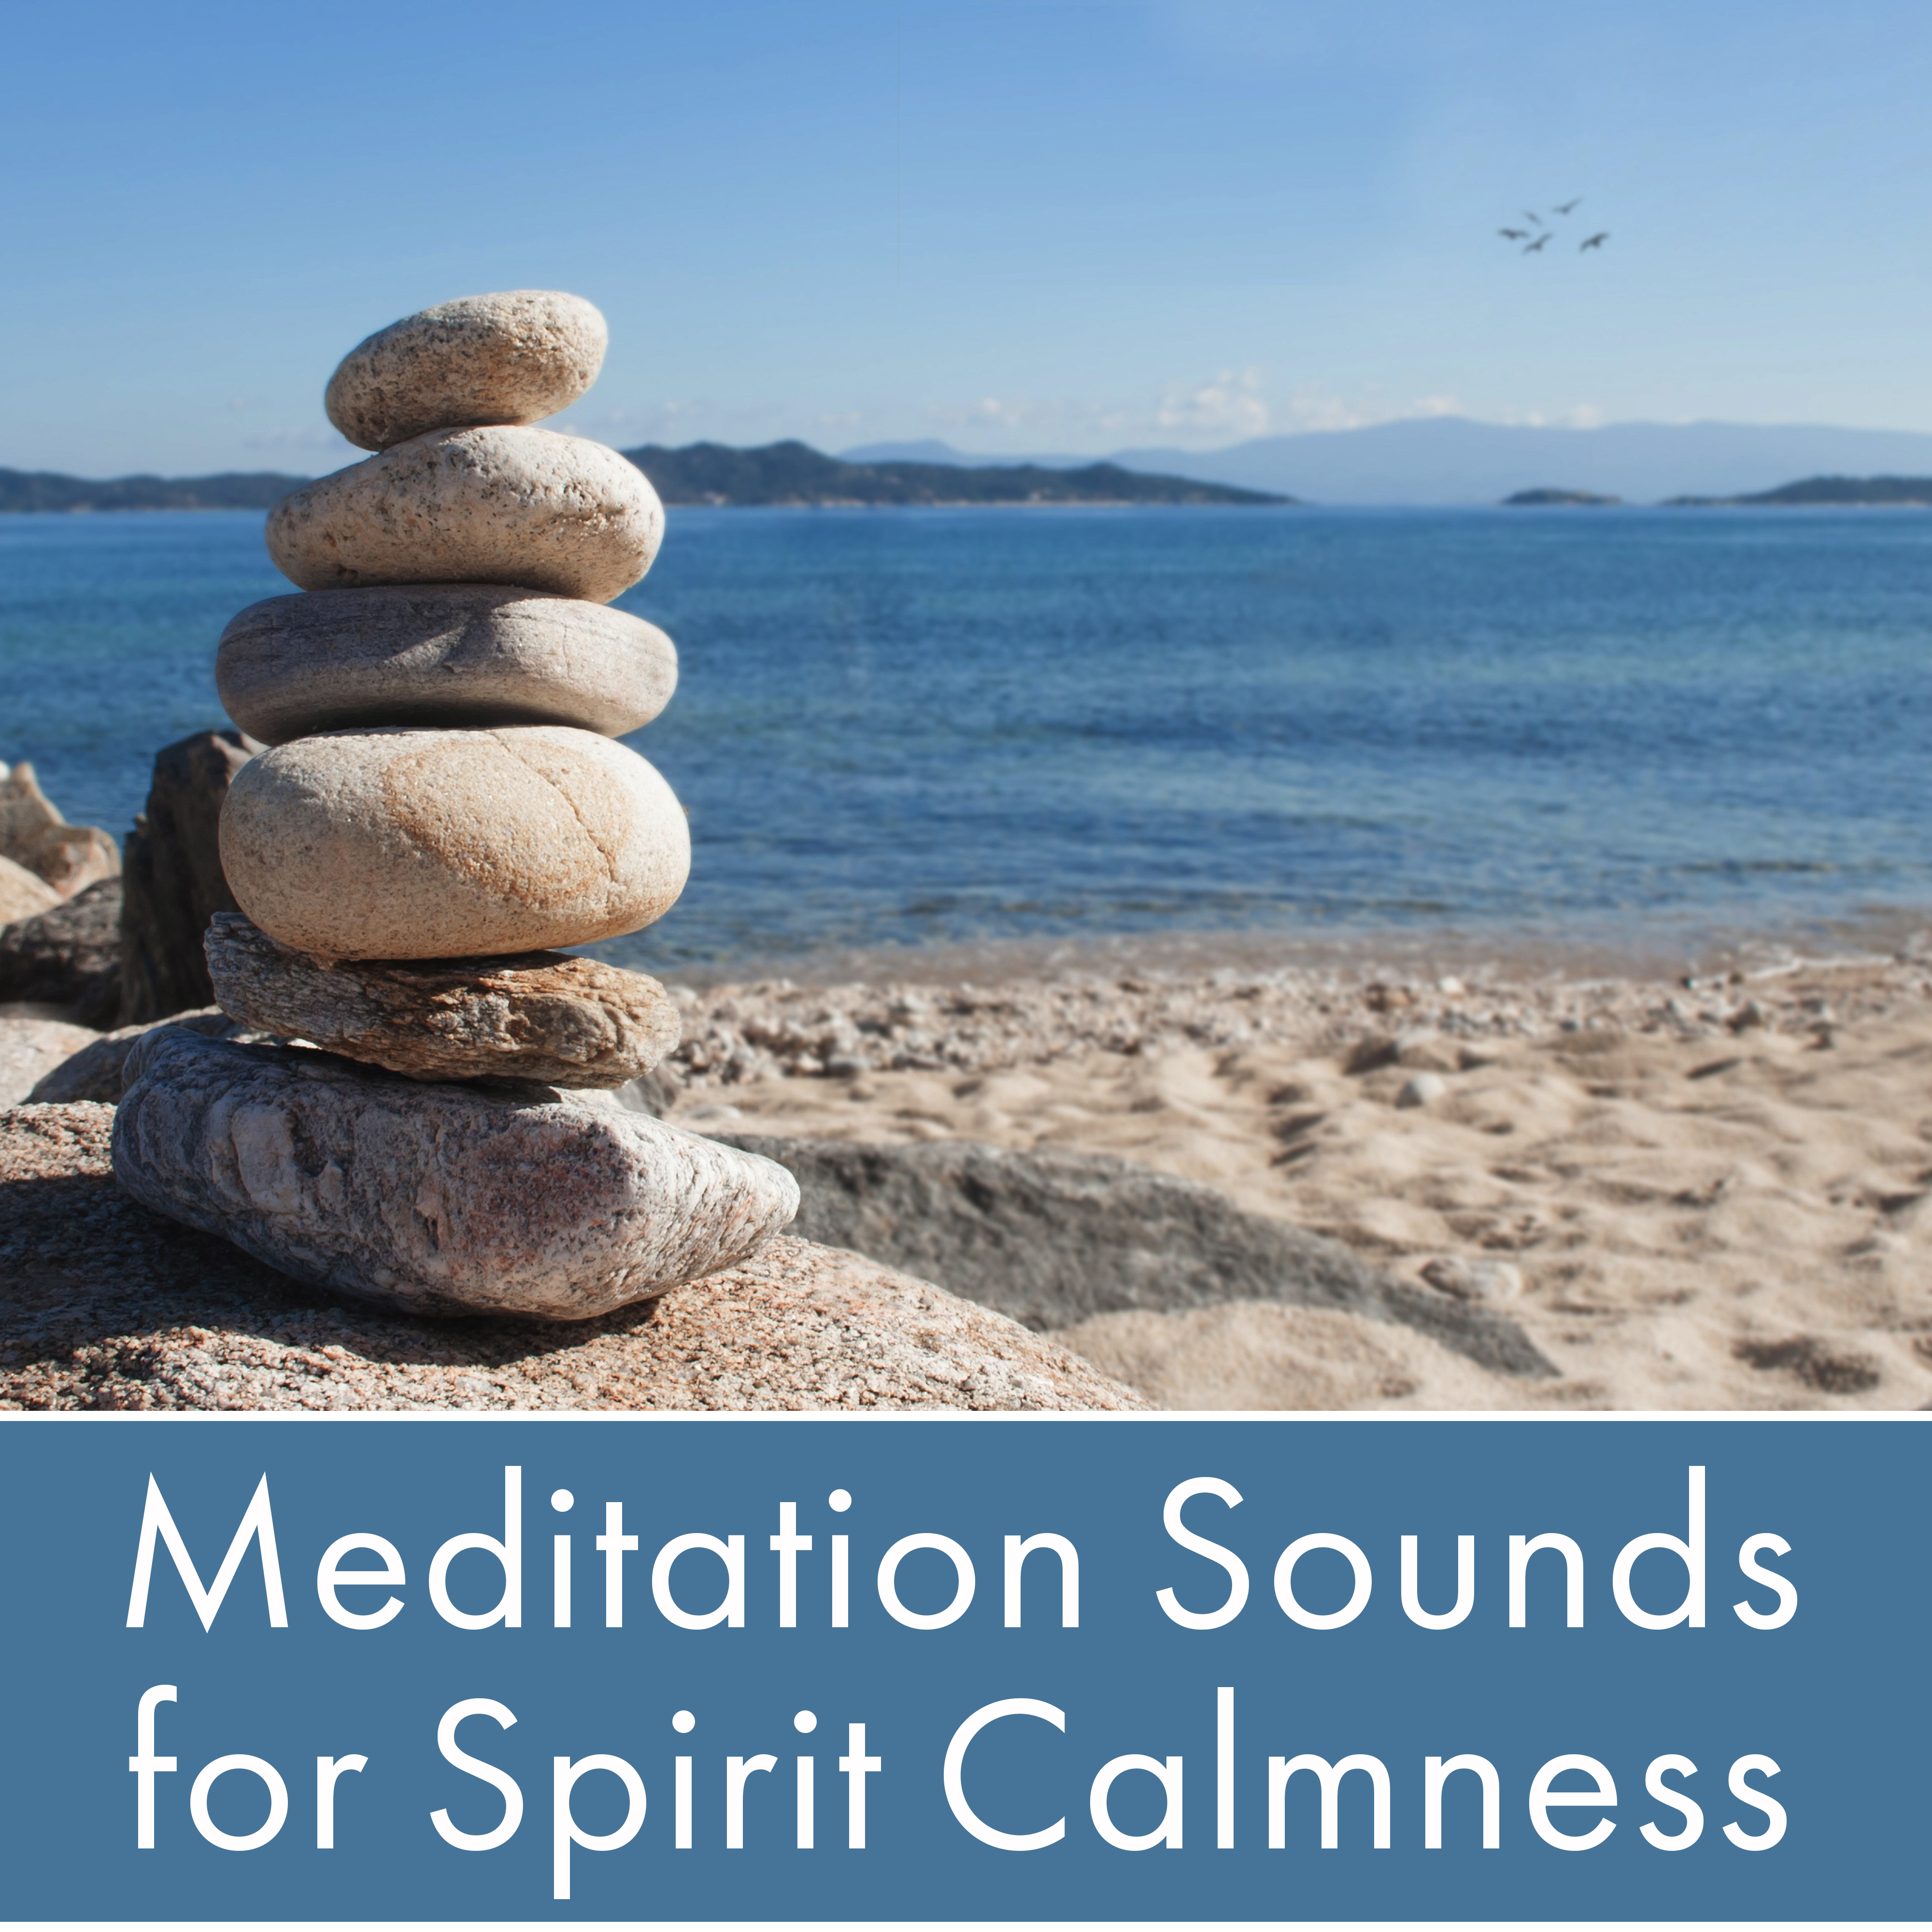 Meditation Sounds for Spirit Calmness – Soothing Waves, Rest with New Age, Buddha Relaxation, Lounge Music